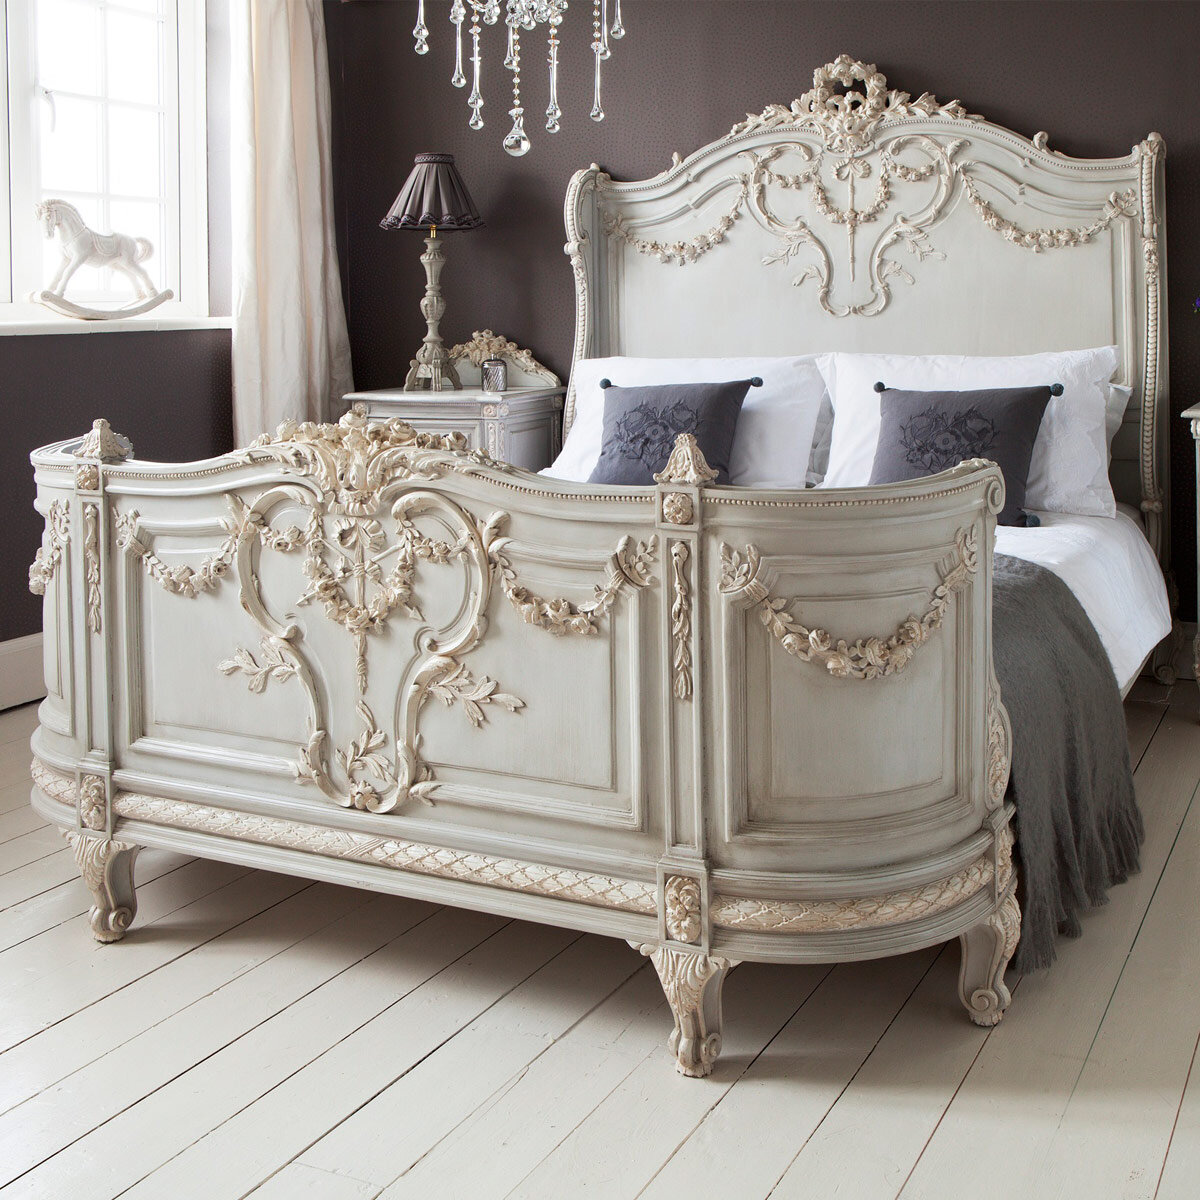 French bed- bonaparte - The French Bedroom Company - www.homeworlddesign.com